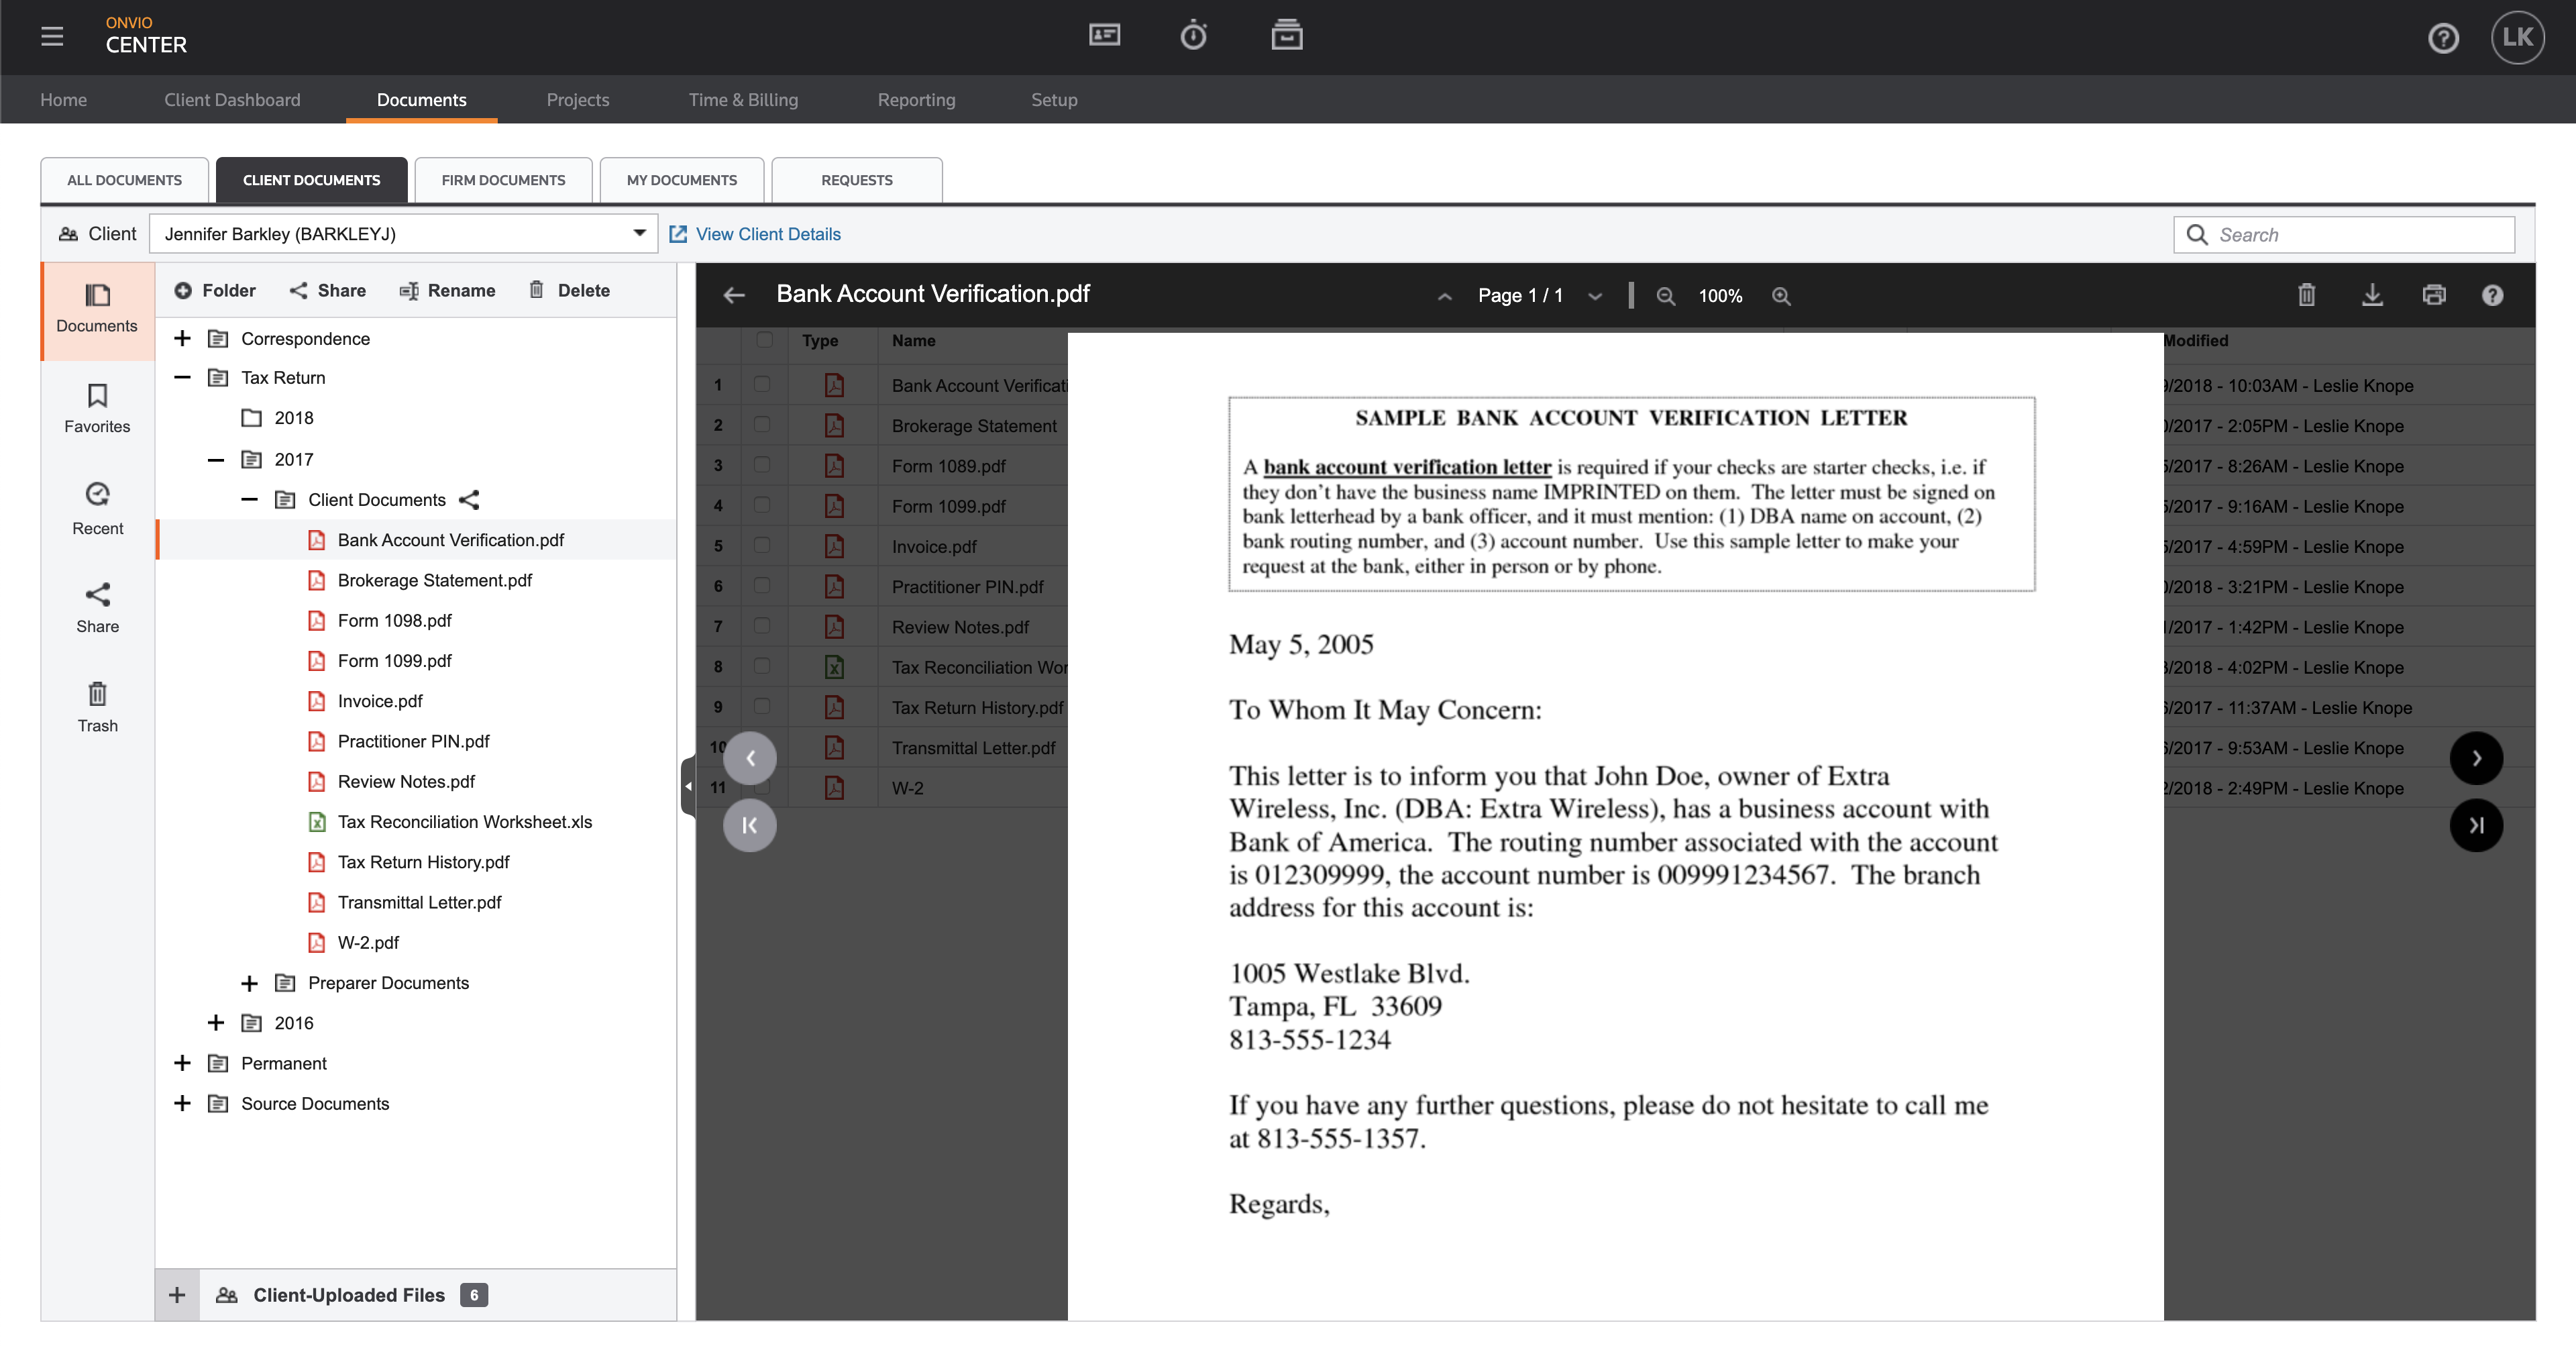 A screenshot of the documents function in Onvio.